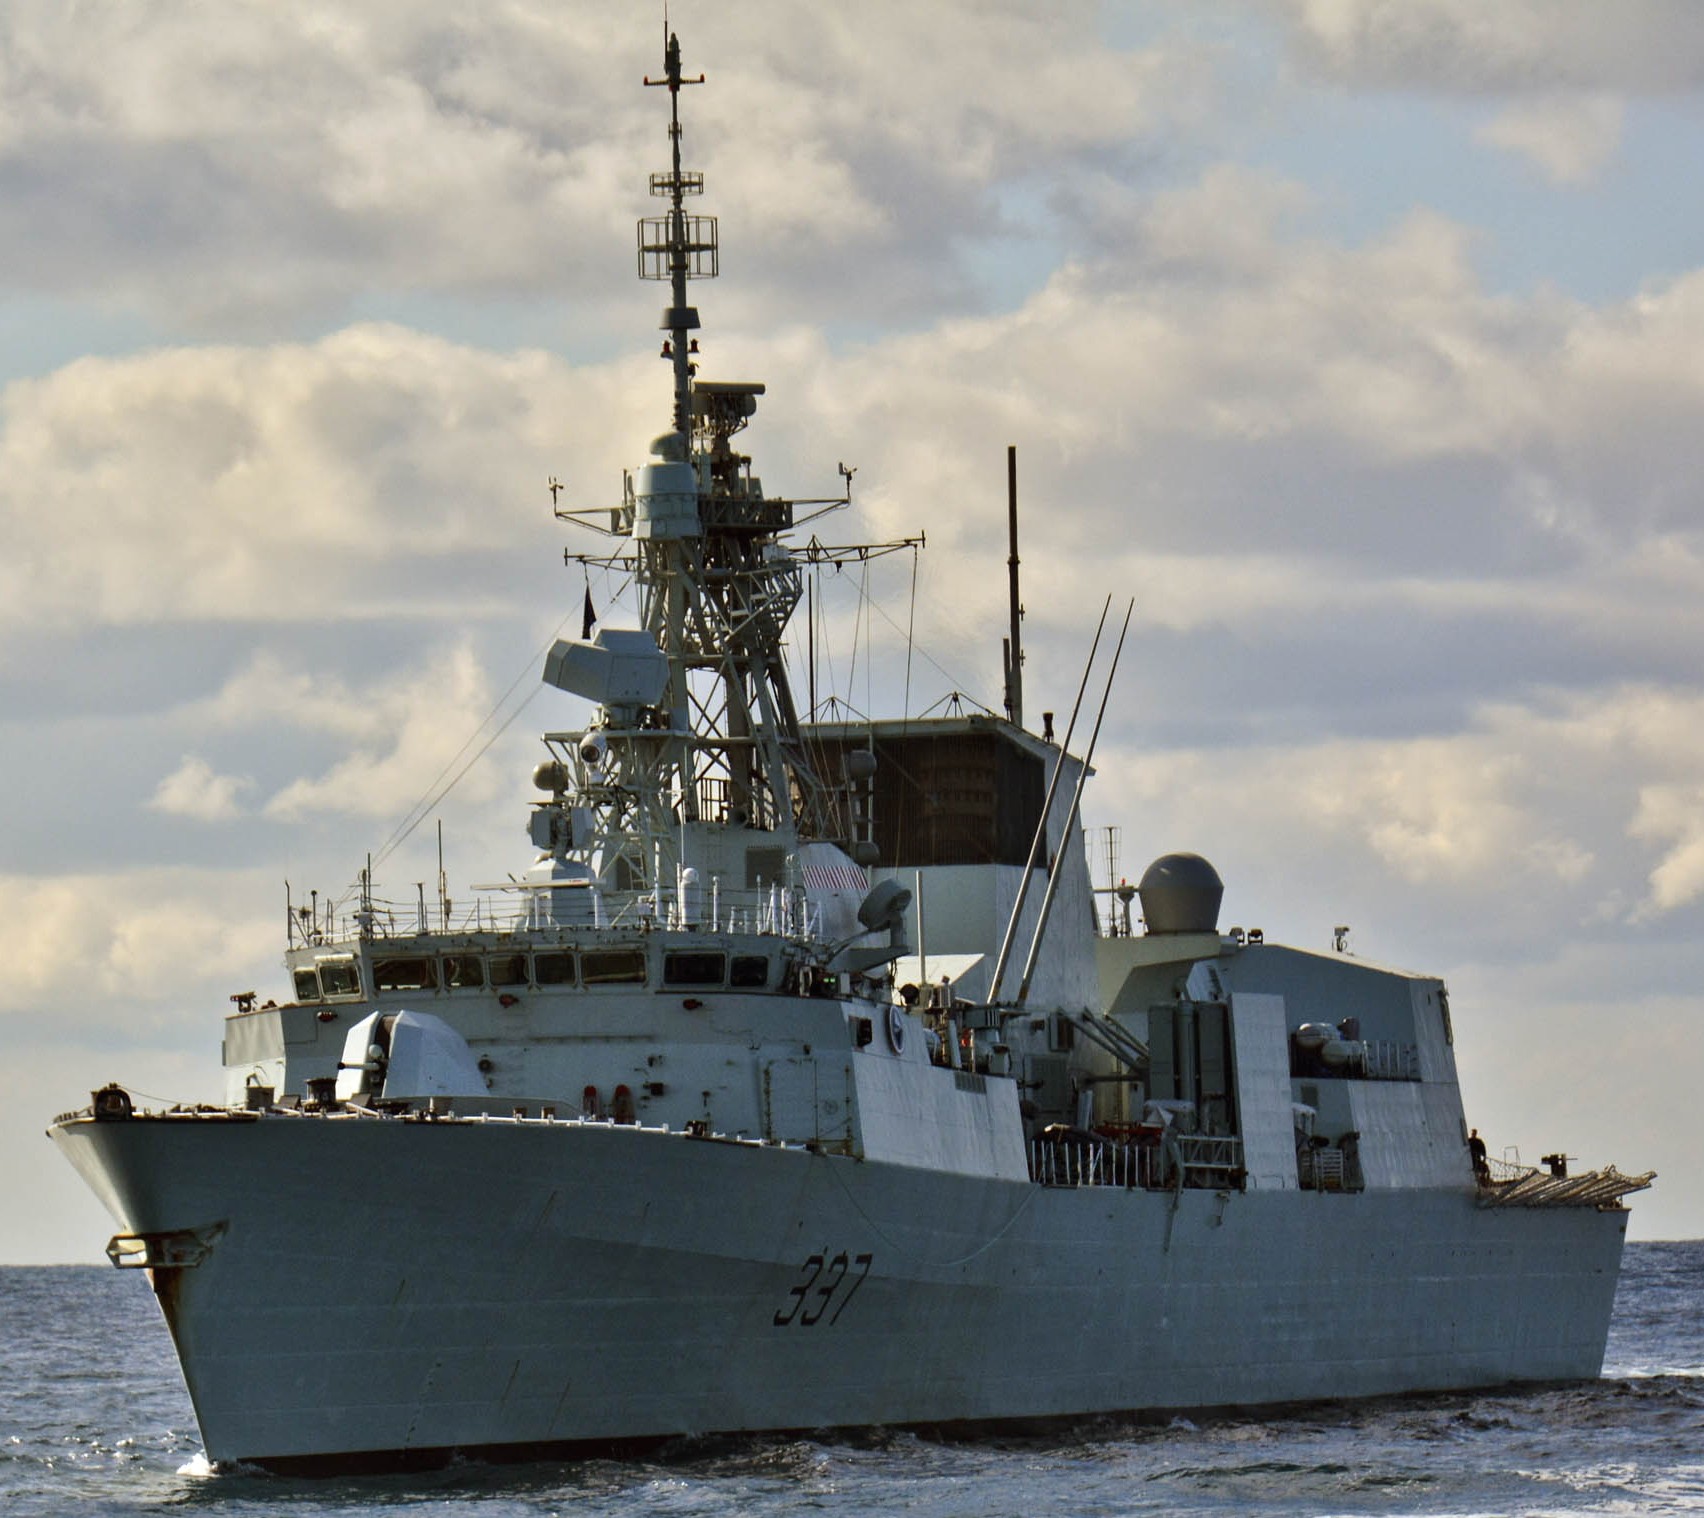 ffh-337 hmcs fredericton halifax class helicopter patrol frigate ncsm royal canadian navy 05